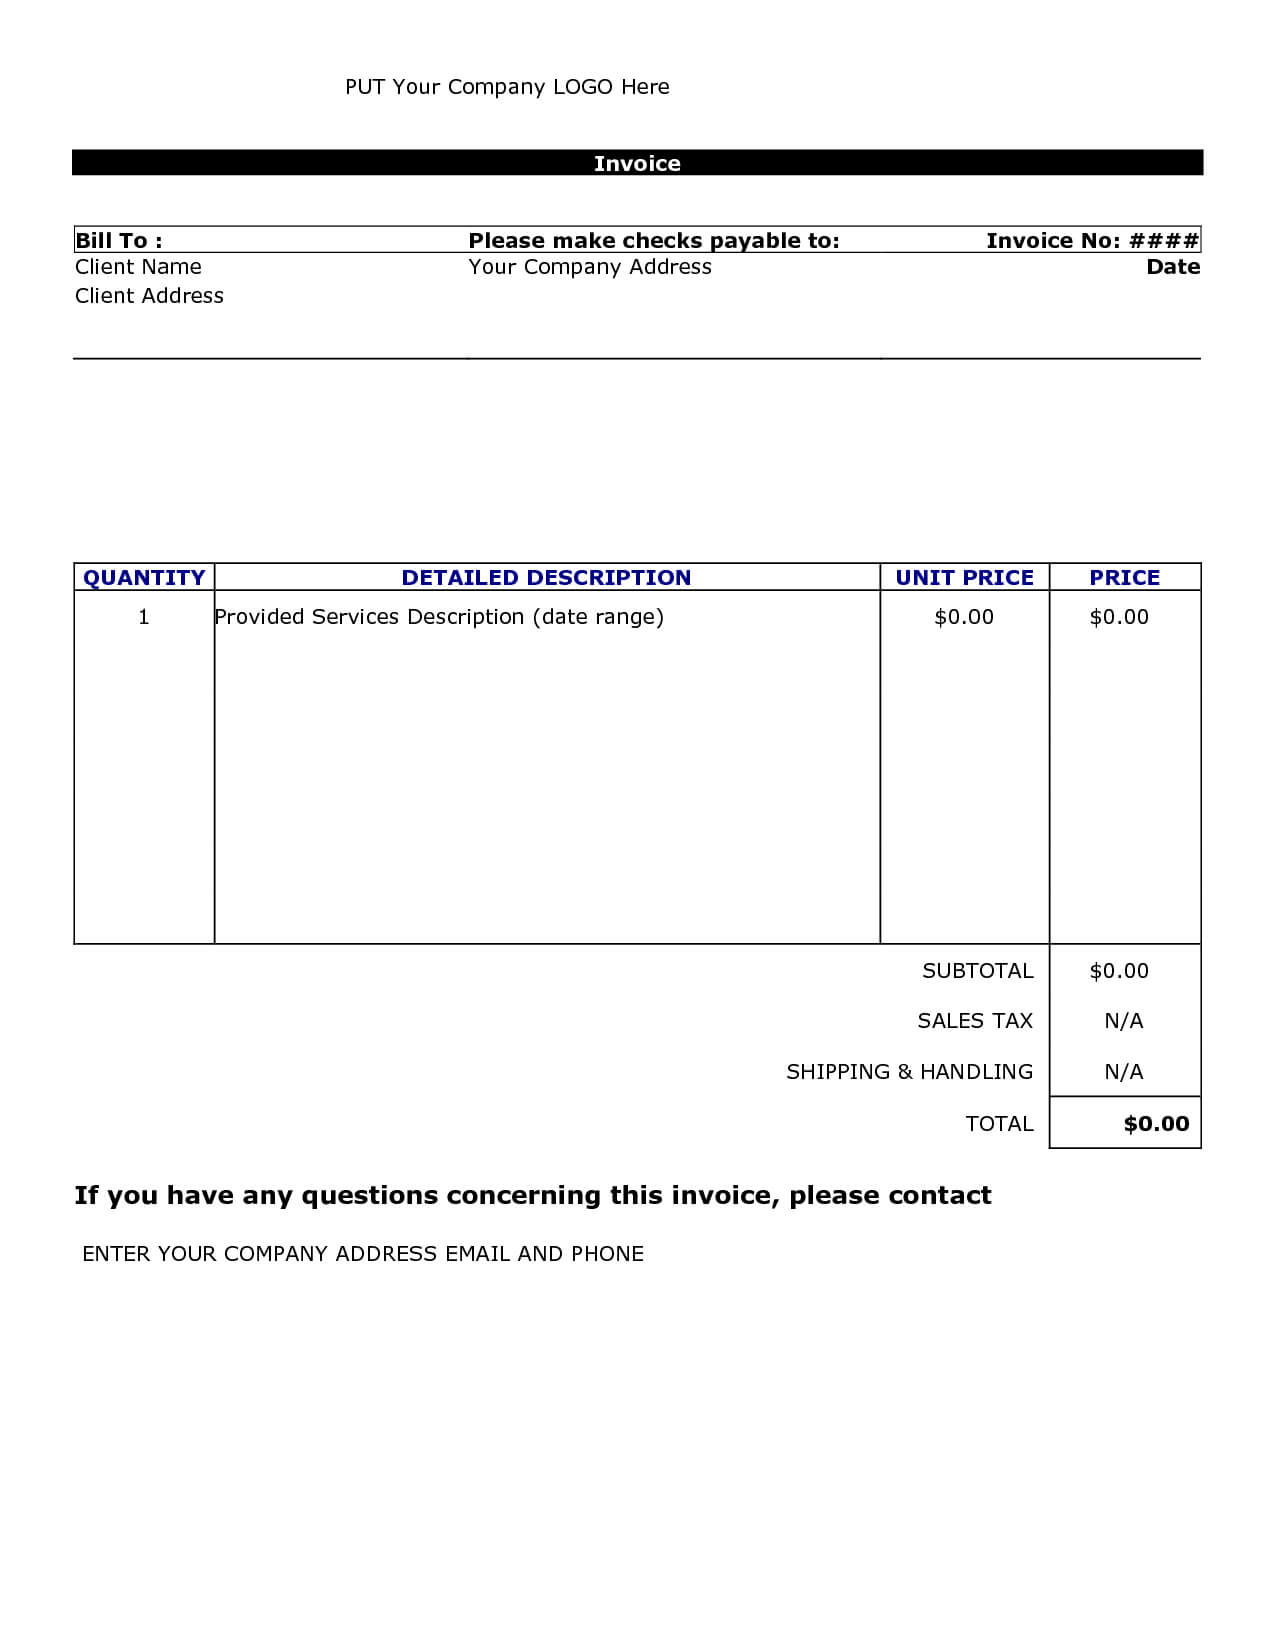 Invoice Template Word 2010 | Invoice Sample Template Pertaining To Invoice Template Word 2010